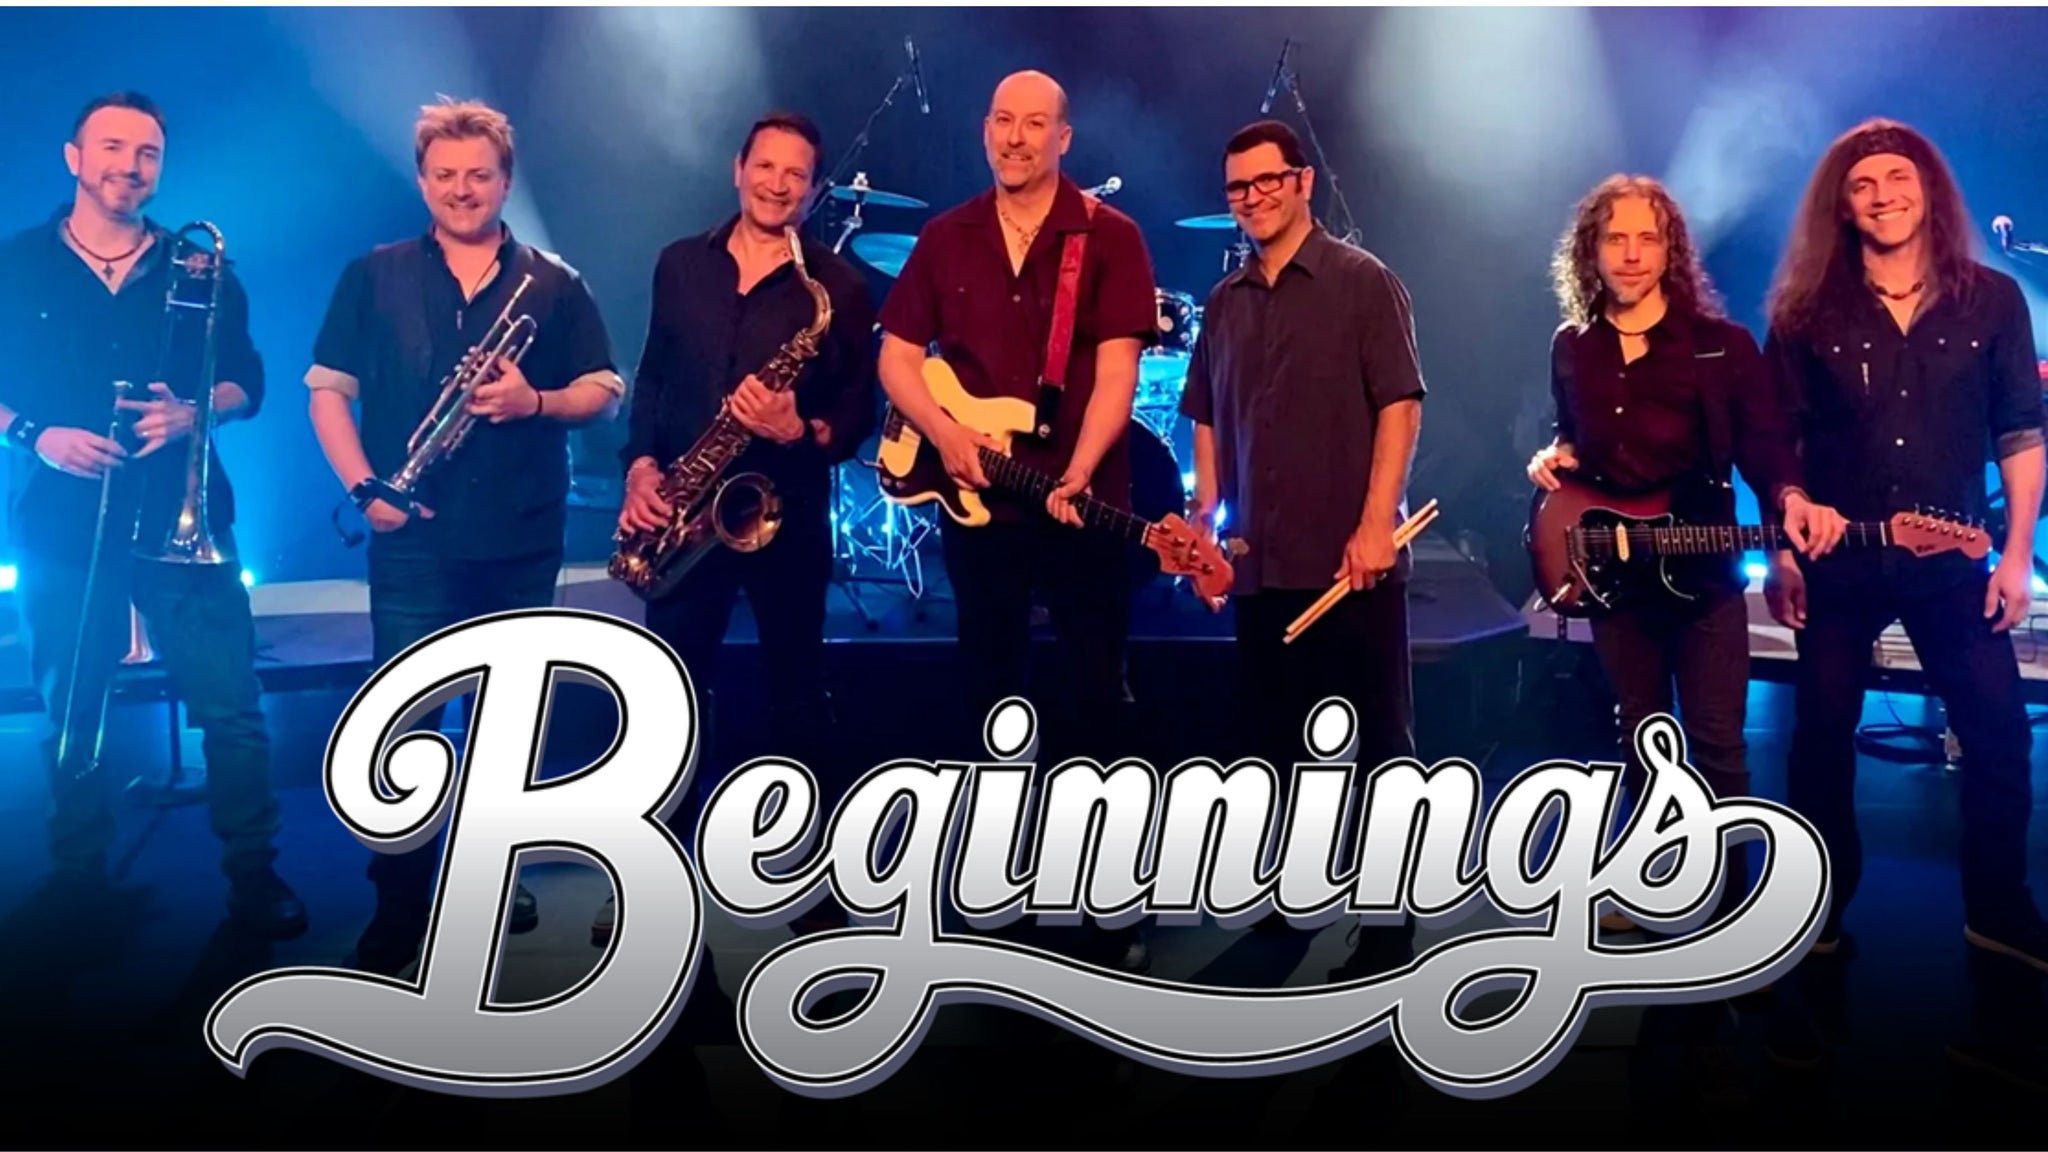 Beginnings: A Celebration Of The Music Of Chicago in Hagerstown promo photo for MD Theatre presale offer code